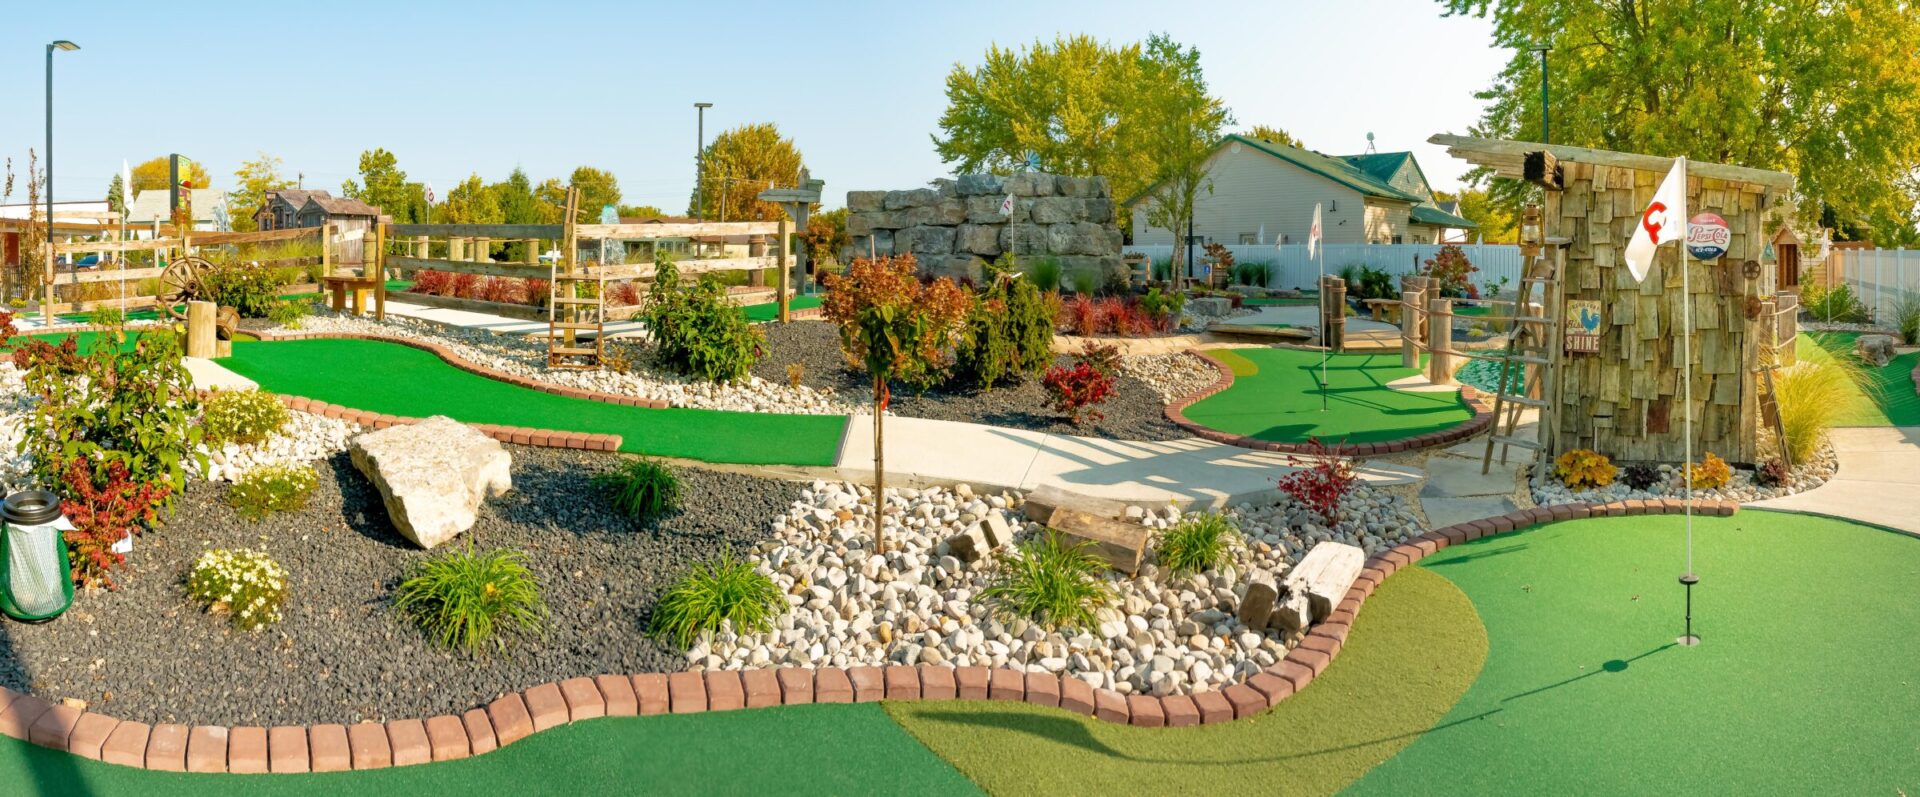 This panoramic image shows a vibrant outdoor miniature golf course with lush landscaping, various obstacles, rocks, and a rustic-themed watermill hut.